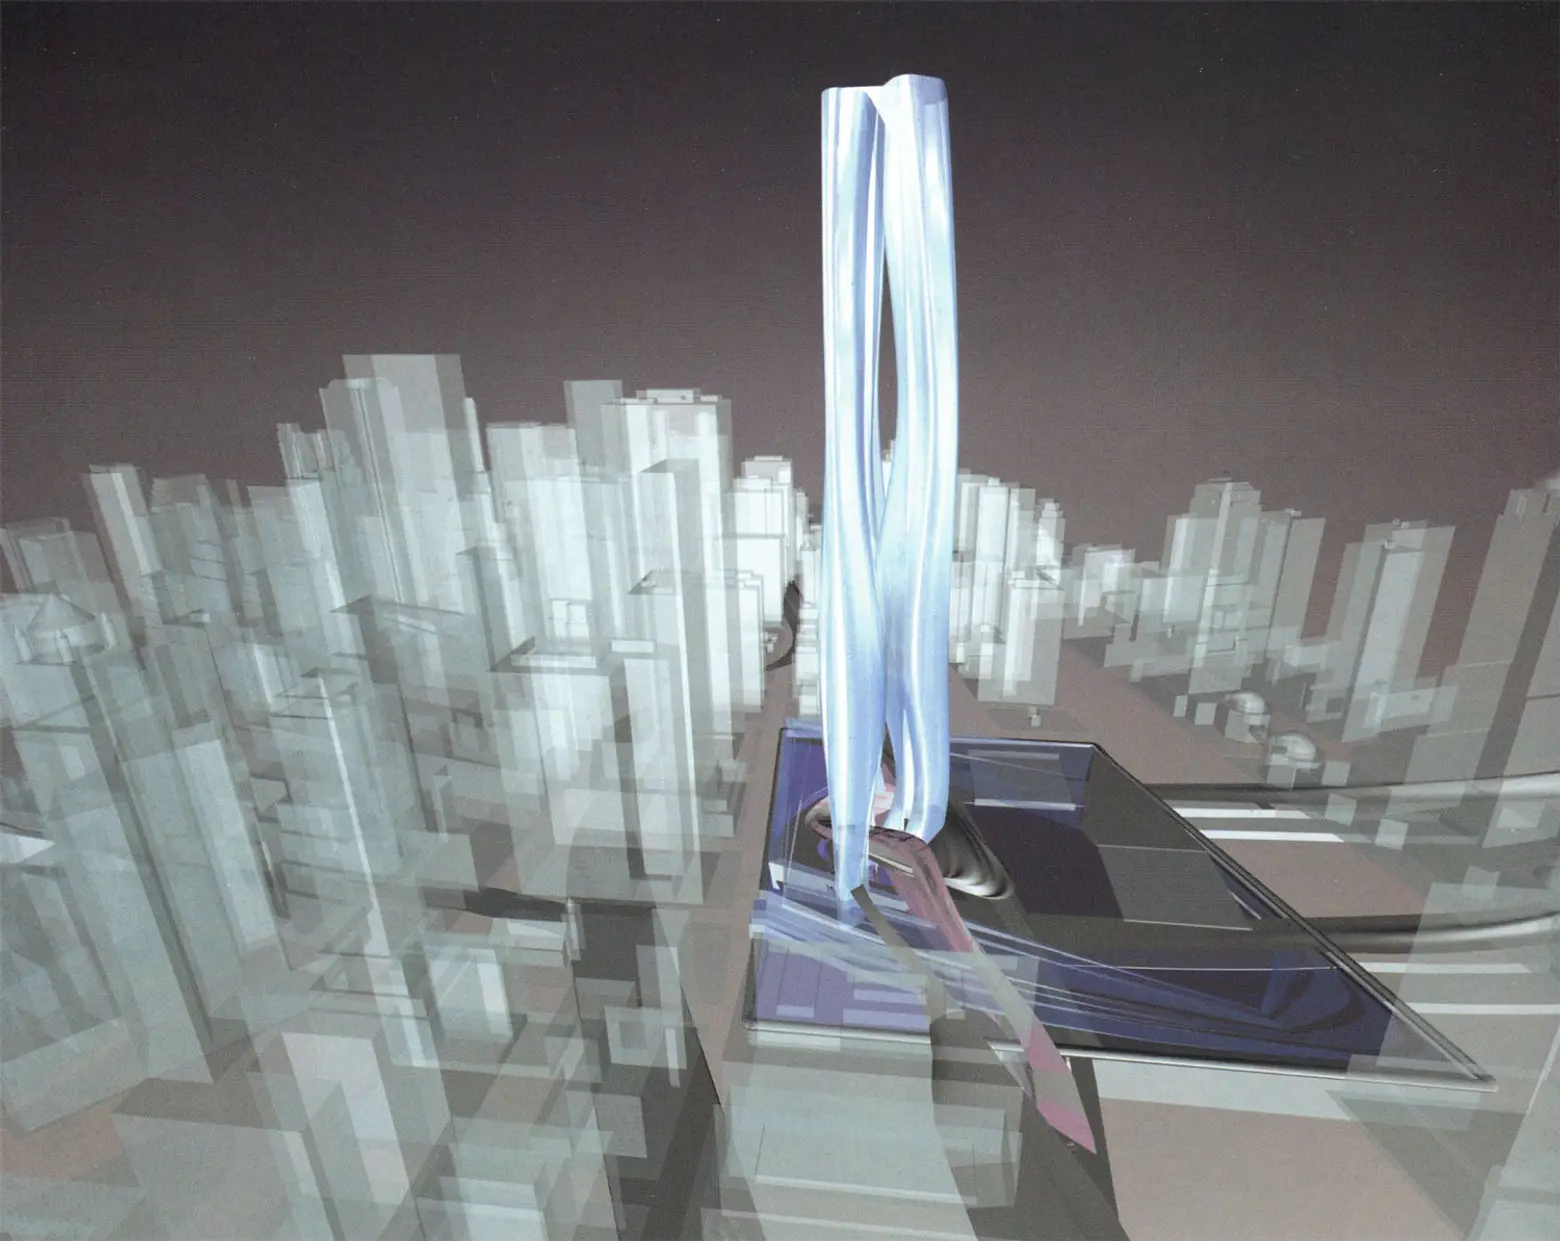 World Trade Center Bundle Towers, Zaha Hadid, Rising to Greatness competition